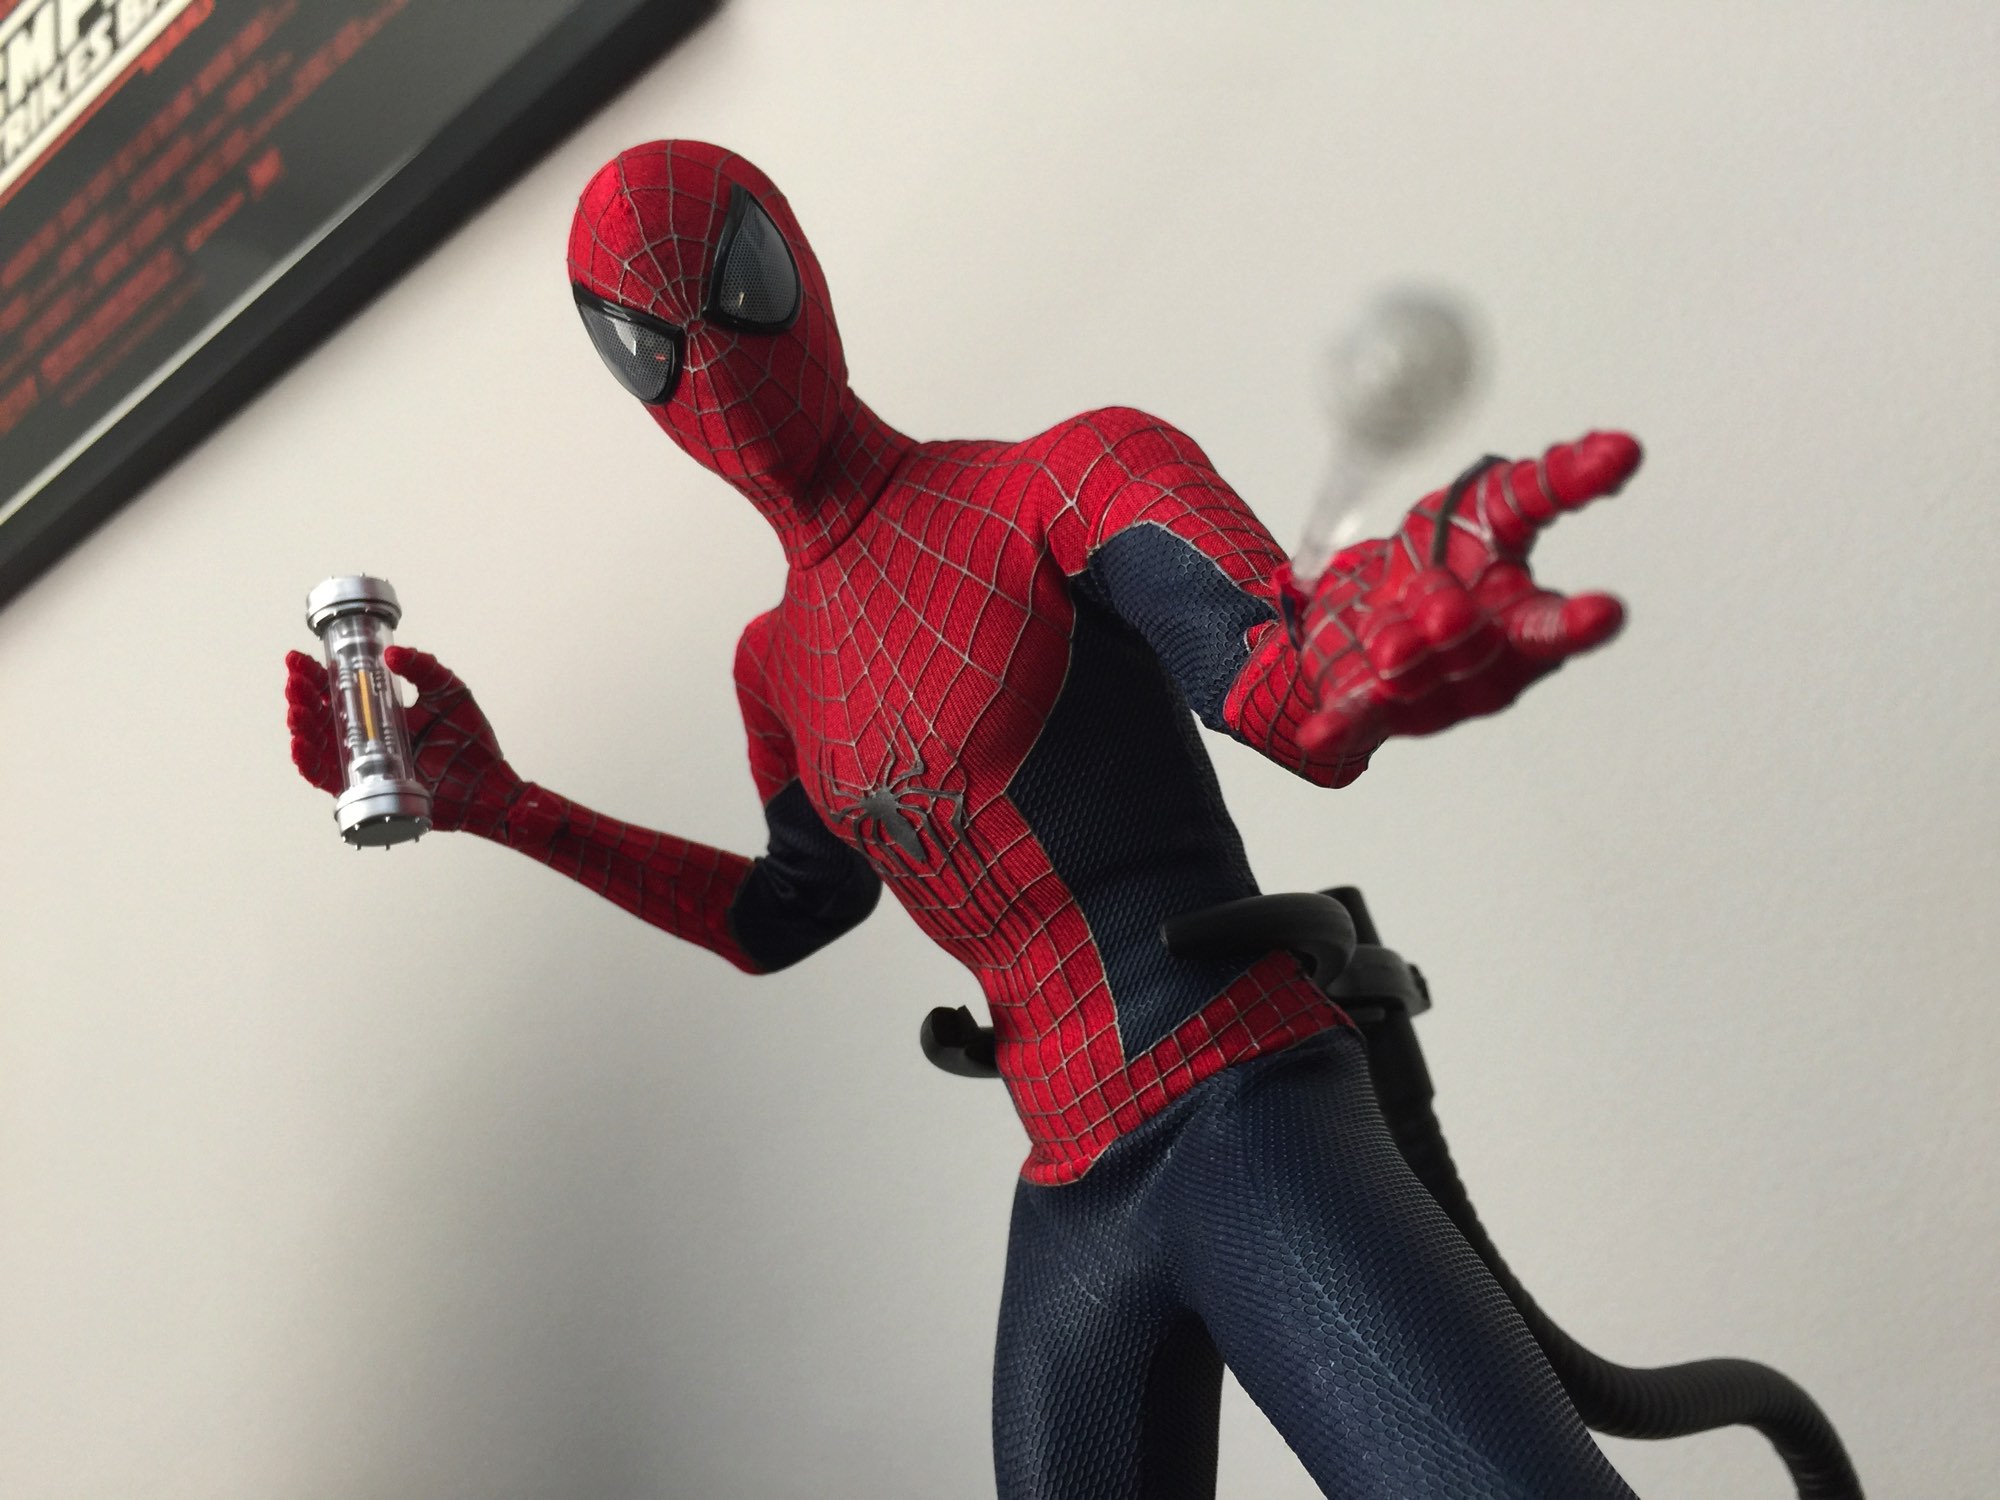 Sideshow/Hot Toys The Amazing Spider-Man 2 Sixth Scale Figure Reviewed.